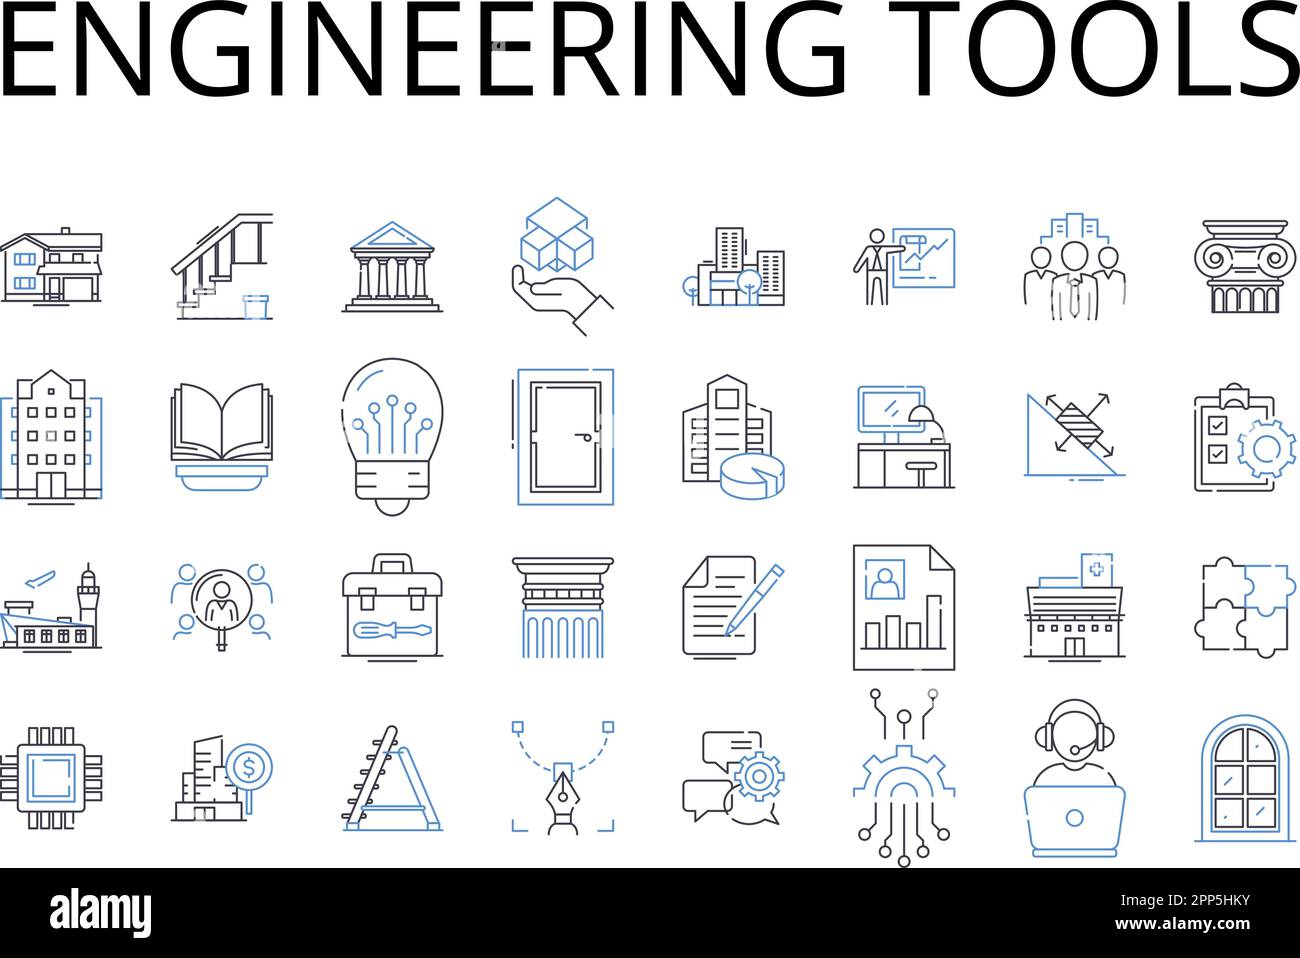 Engineering tools line icons collection. Scientific equipment, Technology devices, Computing machinery, Manufacturing instruments, Research gadgets Stock Vector